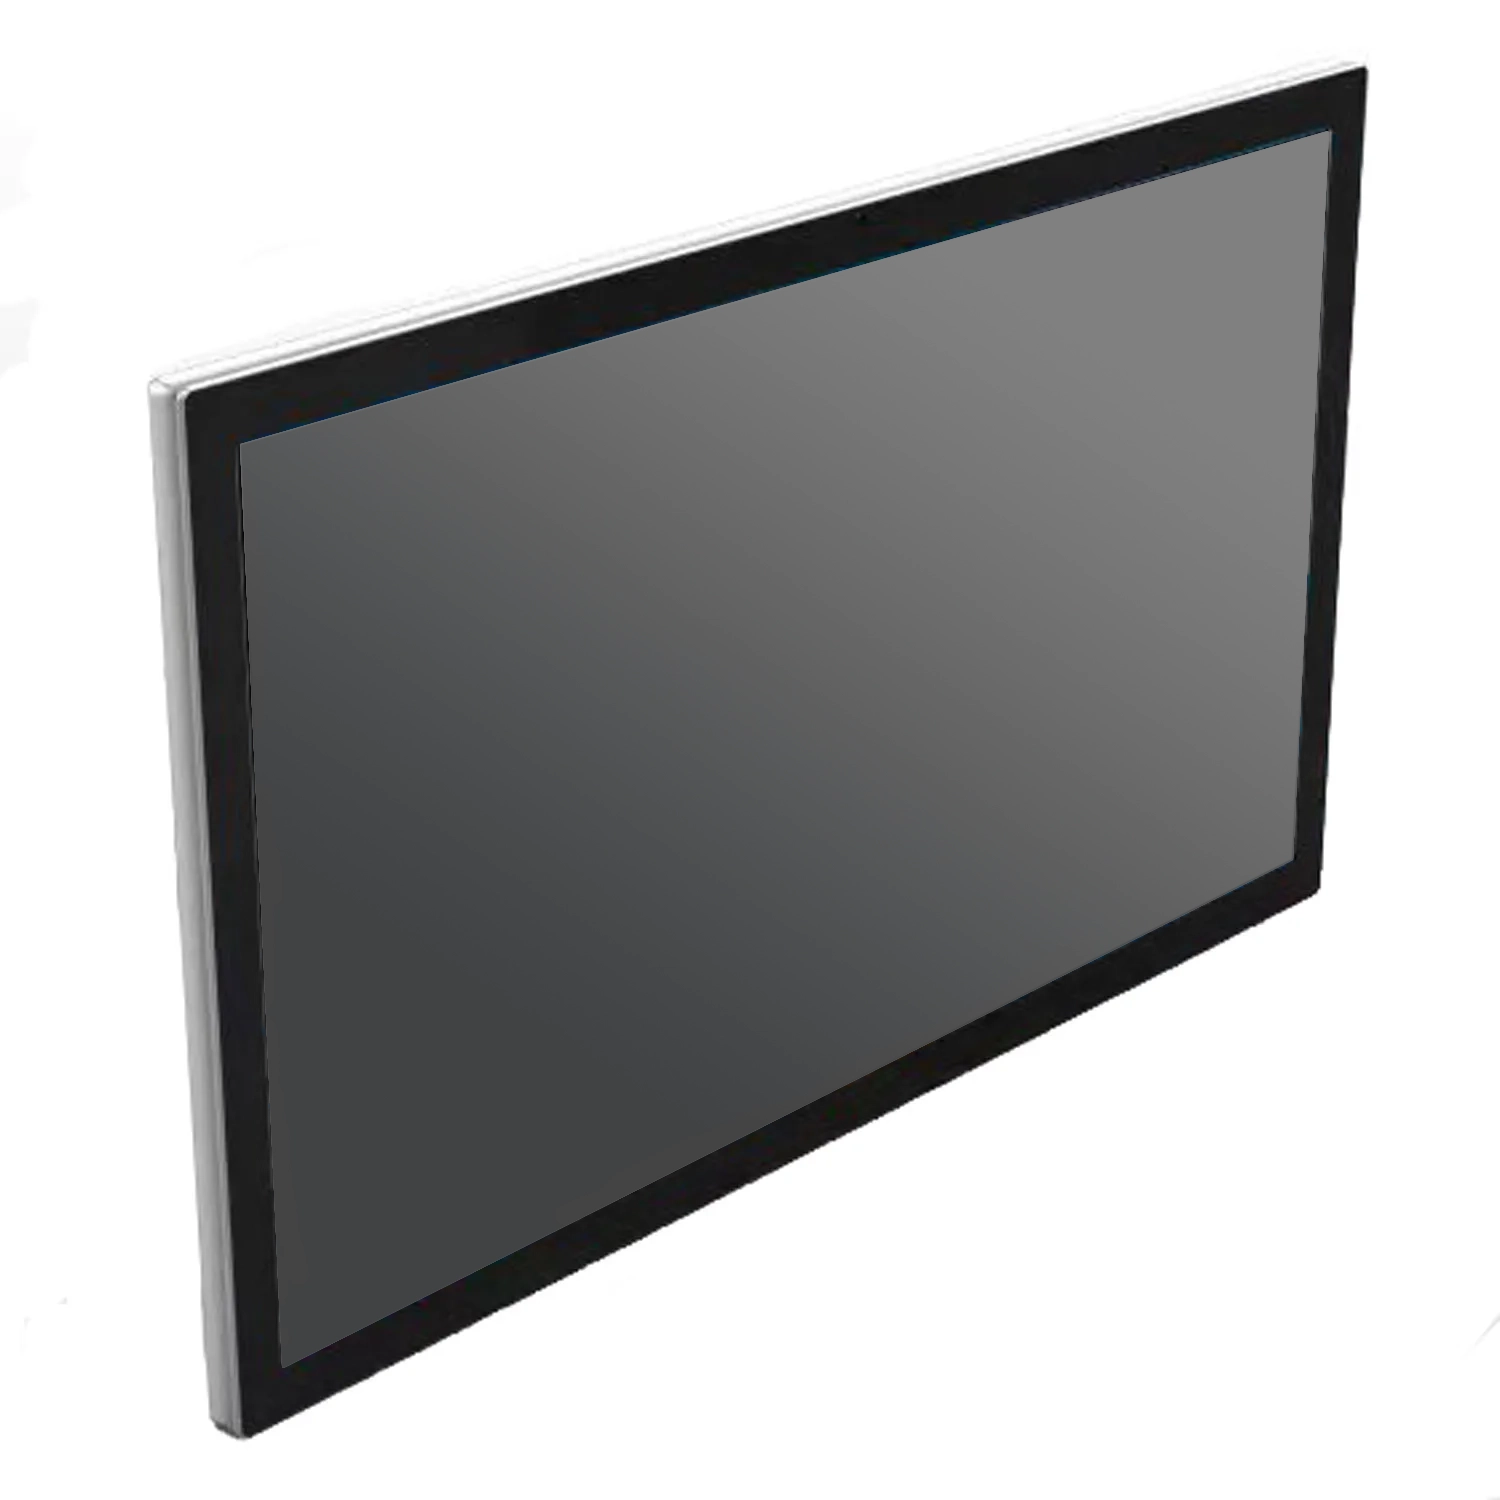 Industrial Non-touch Open Frame Touch Monitor Keetouch GmbH